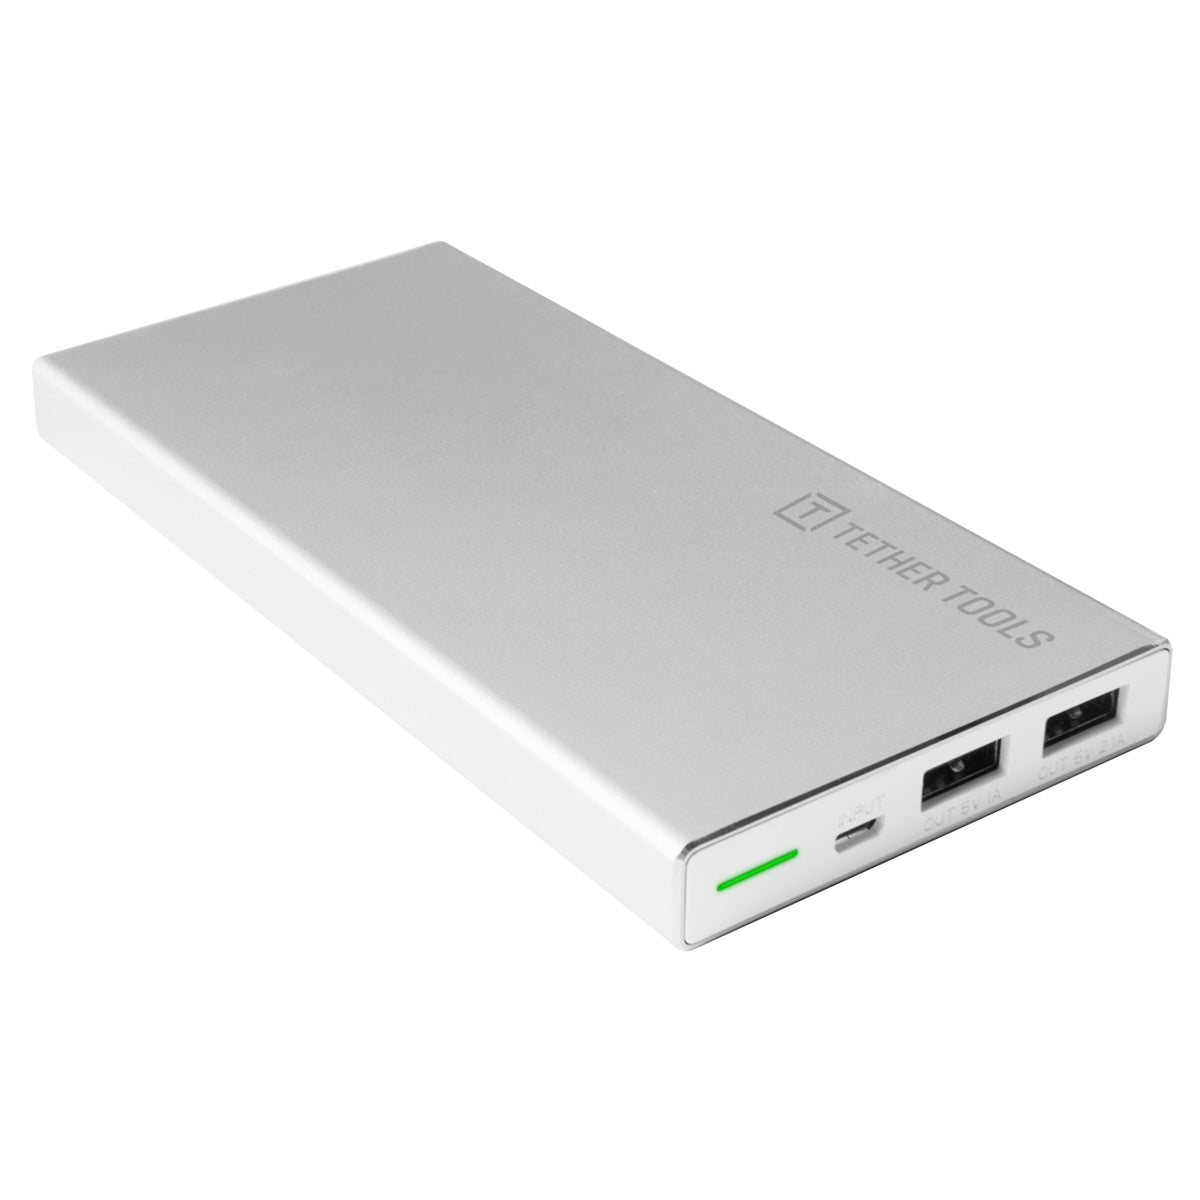 Tether Tools Rock Solid External Battery Pack 10,000 mAh